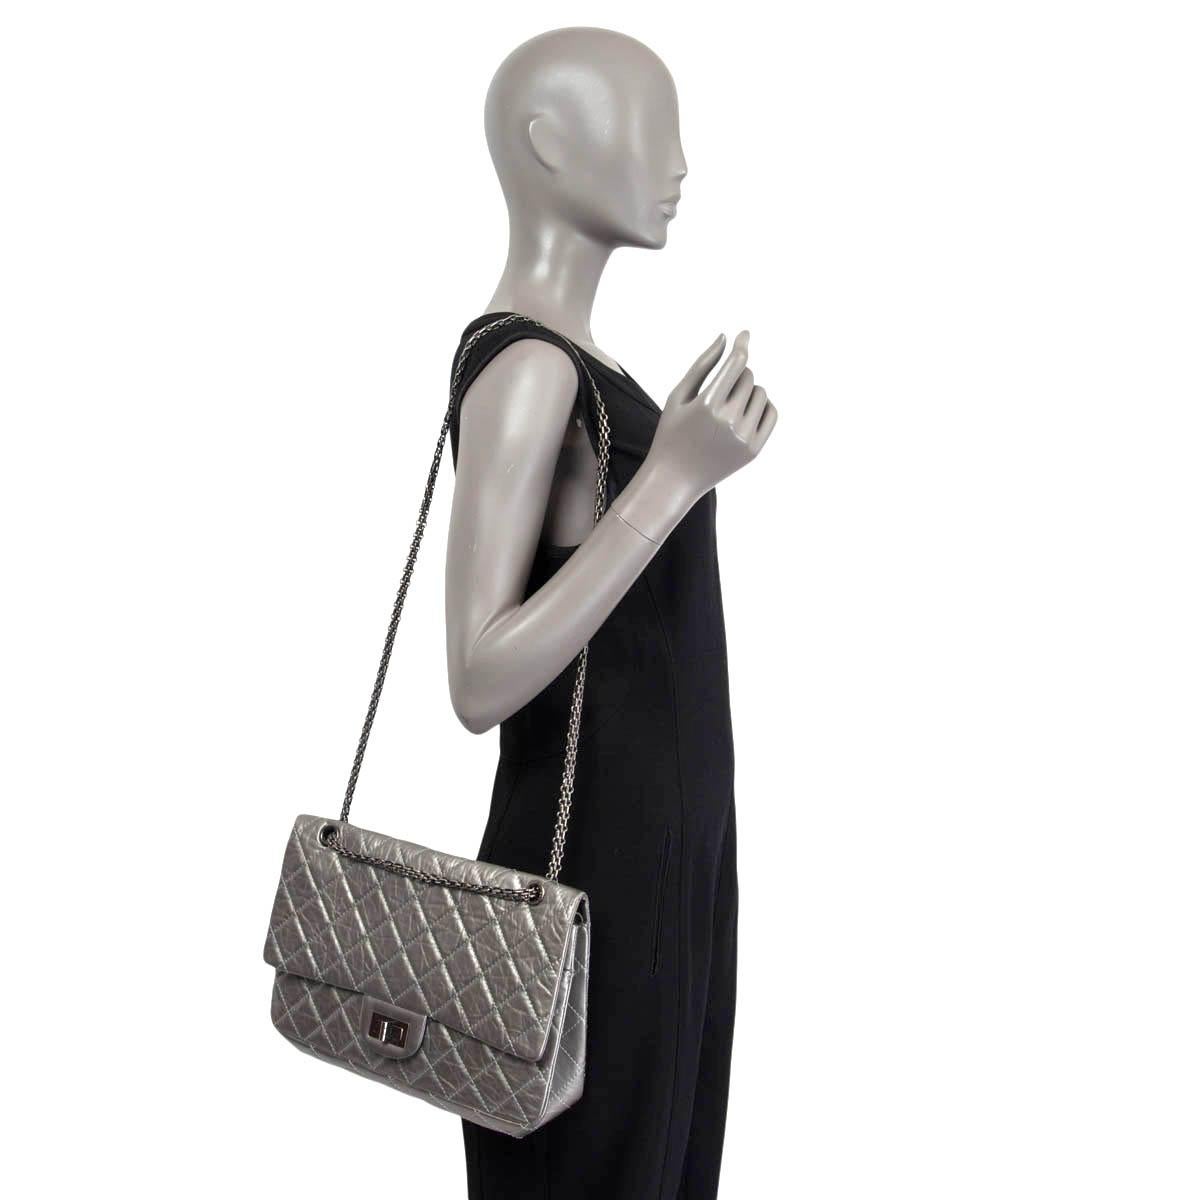 CHANEL metallic dark silver quilted leather 2.55 REISSUE 227 MAXI Shoulder Bag For Sale 1